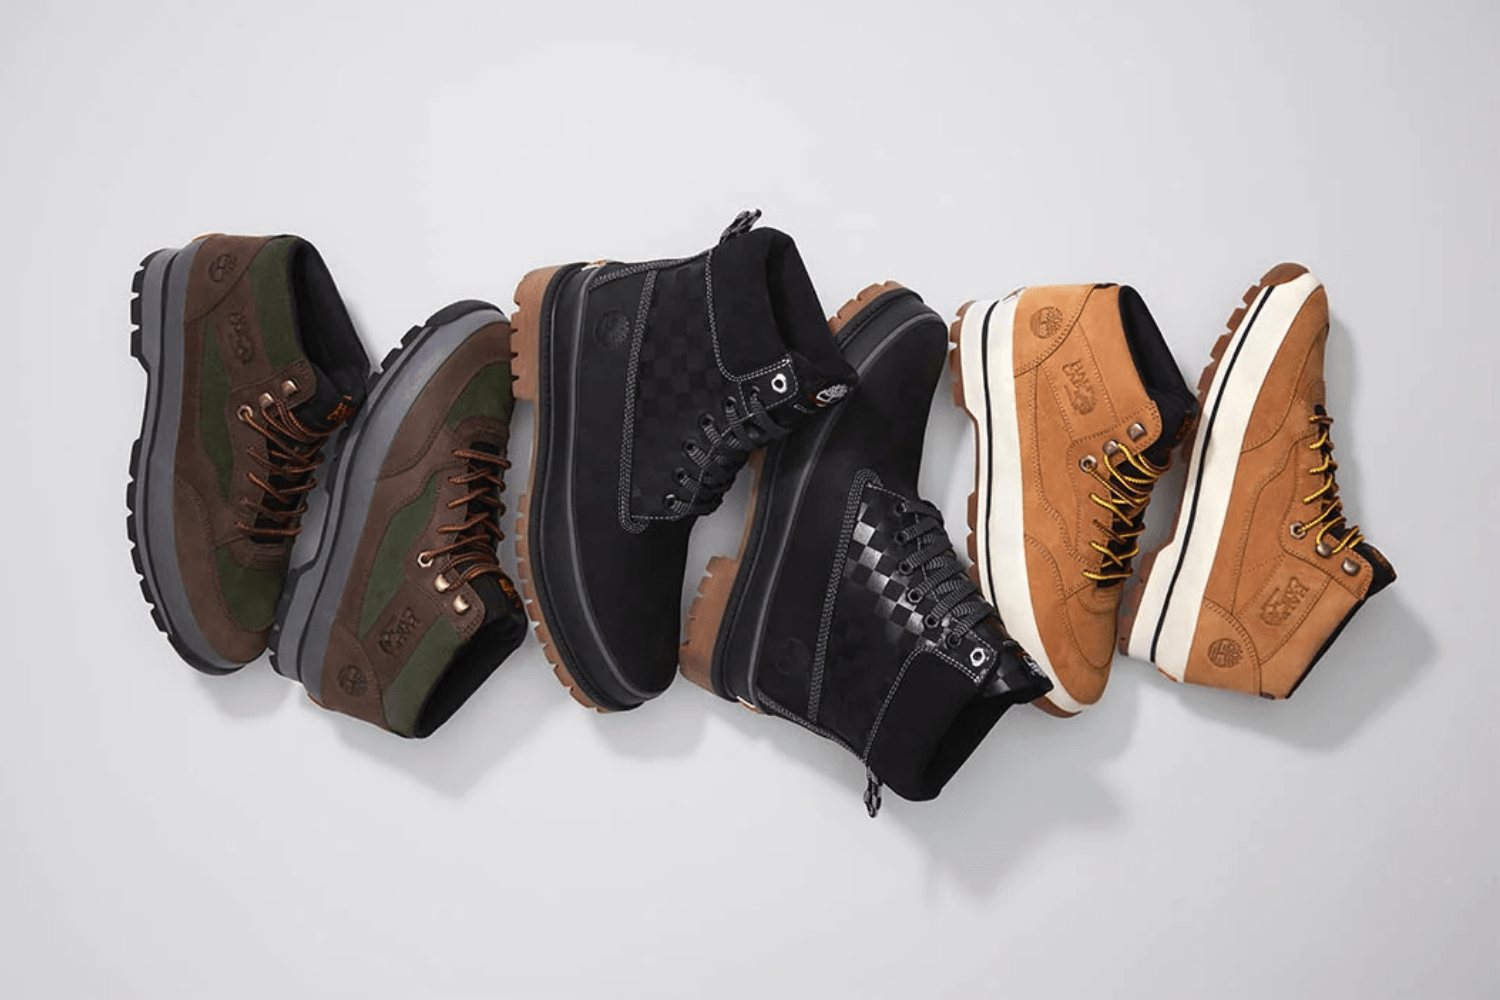 Timberland x Vans are coming up with their first collab